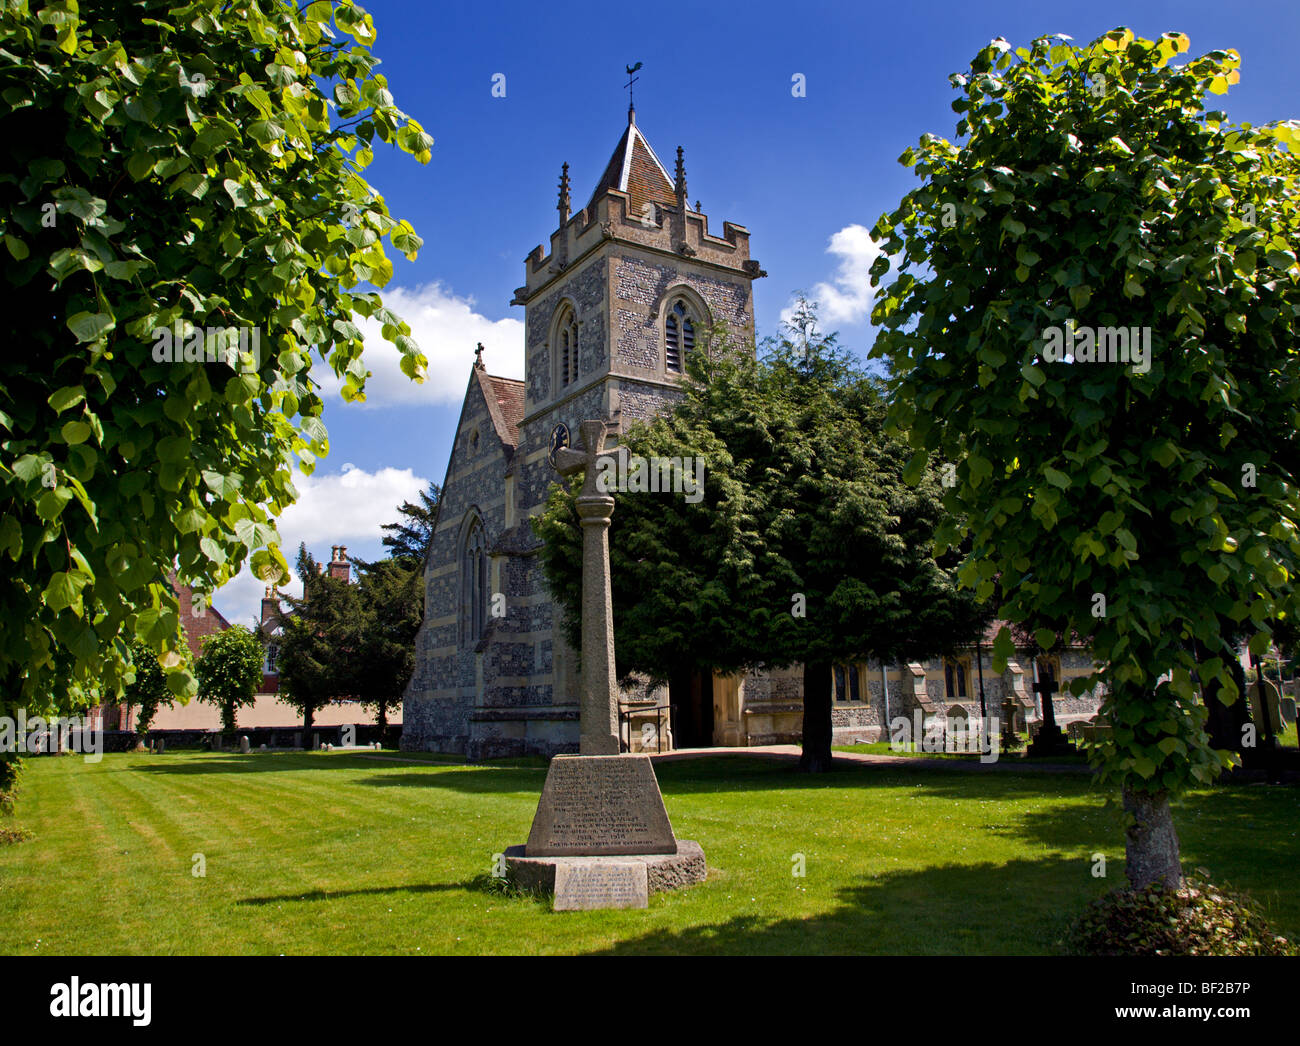 St Michael and the Archangel Church, Winterbourne, Wiltshire, England Stock Photo